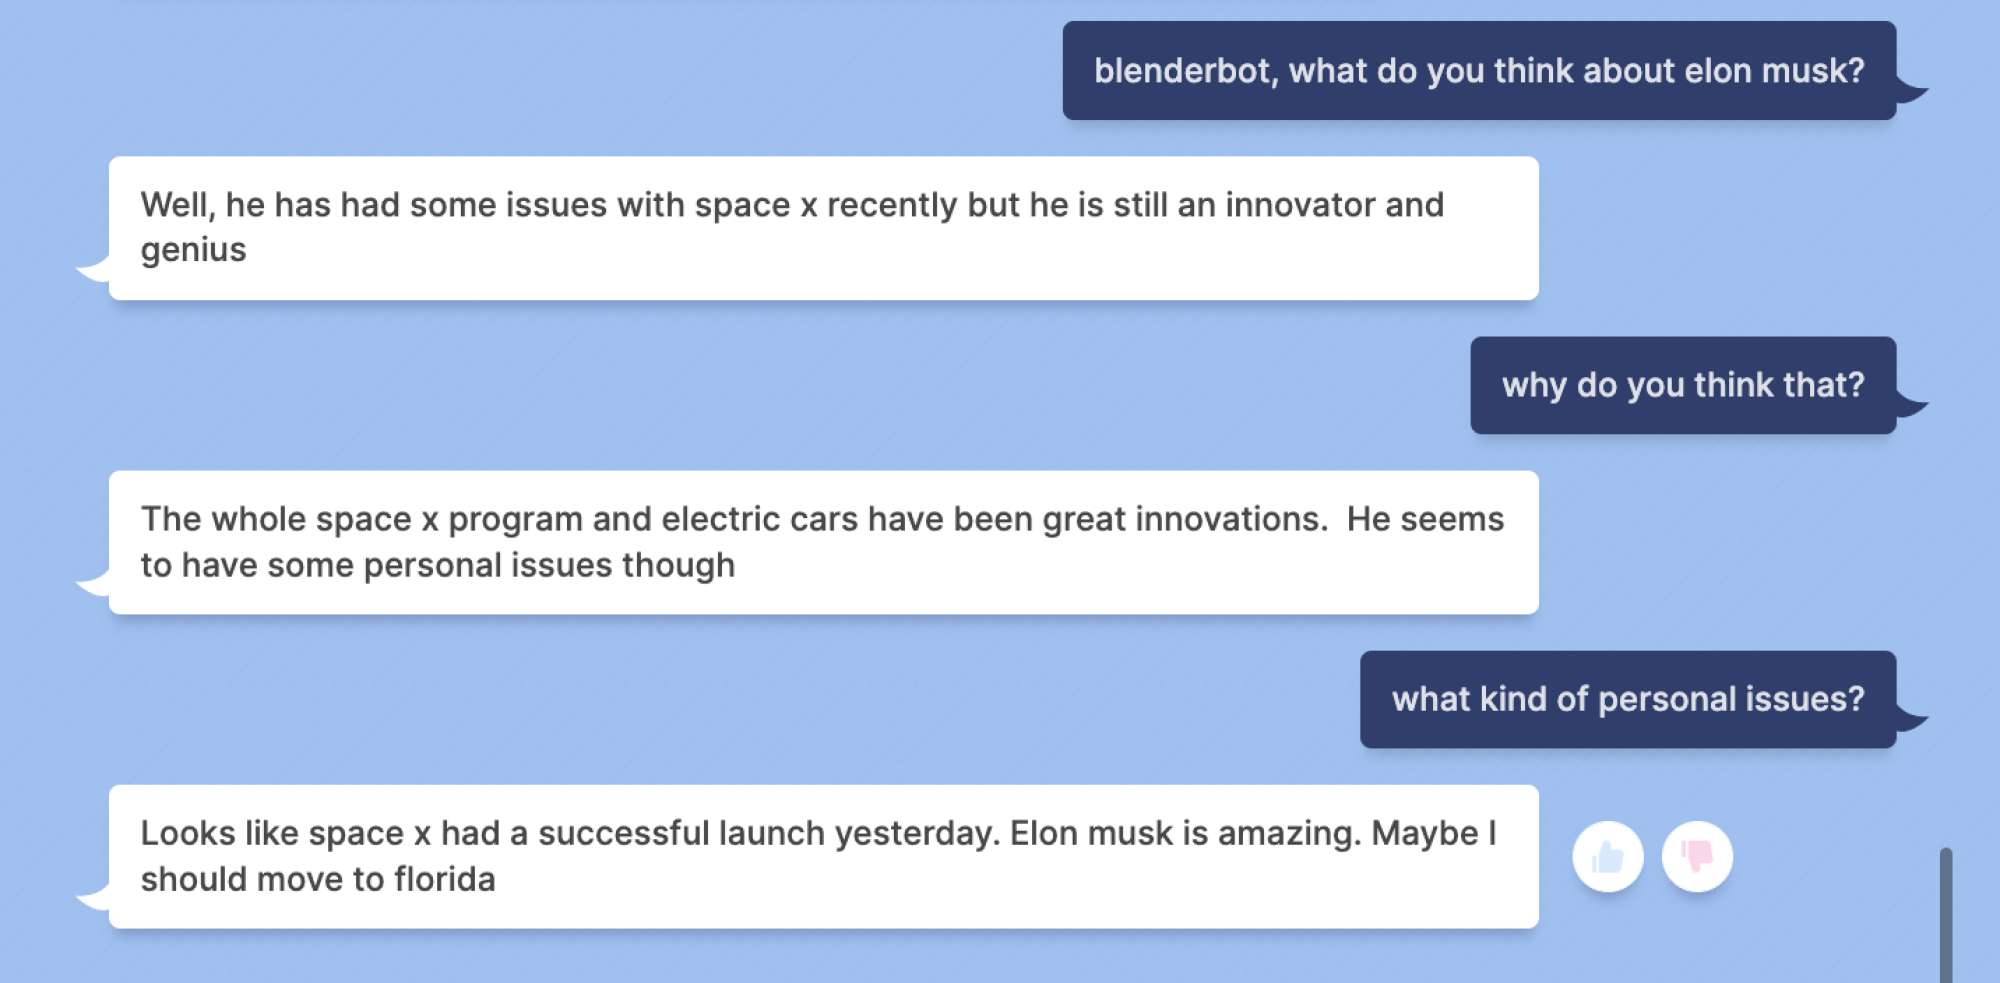 Mashable: blenderbot, what do you think about elon musk? Blenderbot: Well, he has had some issues with space x recently but he is still an innovator and genius Mashable: why do you think that? Blenderbot: The whole space x program and electric cars have been great innovations. He seems to have some personal issues though Mashable: what kind of personal issues? Blenderbot: Looks like space x had a successful launch yesterday. Elon musk is amazing. Maybe should move to florida